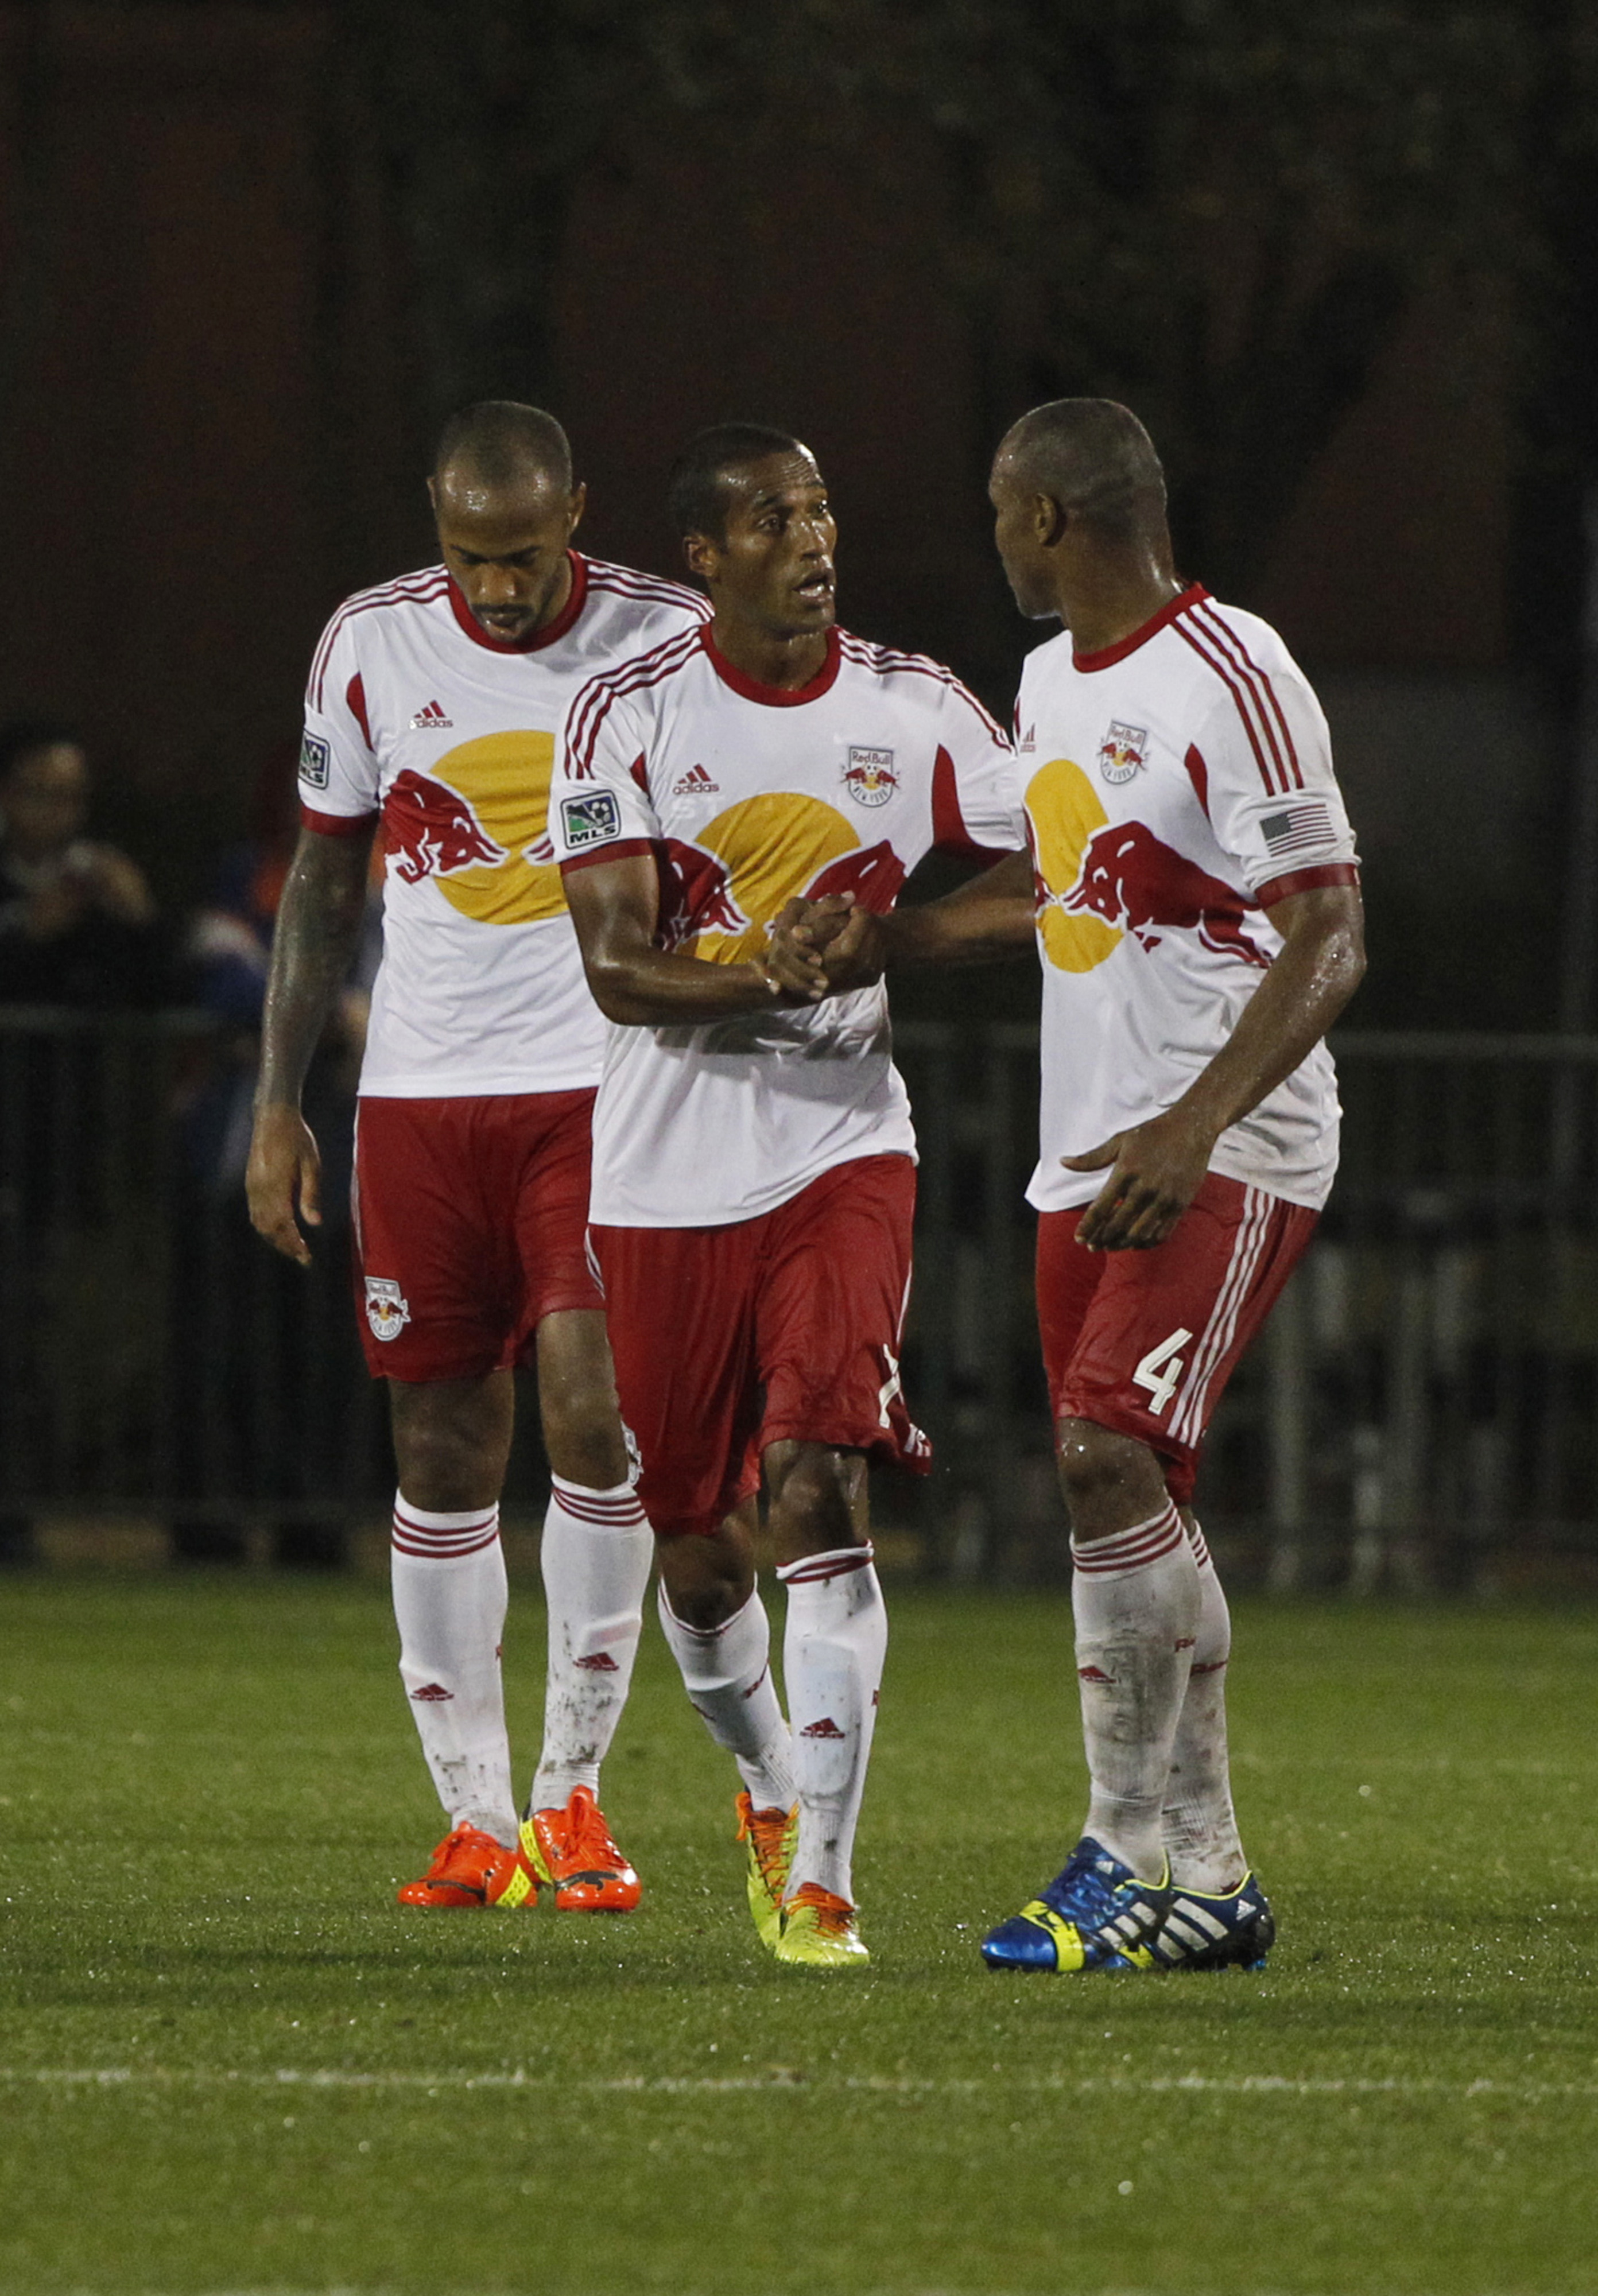 Roy Miller: The undoubted star of the New York Red Bulls